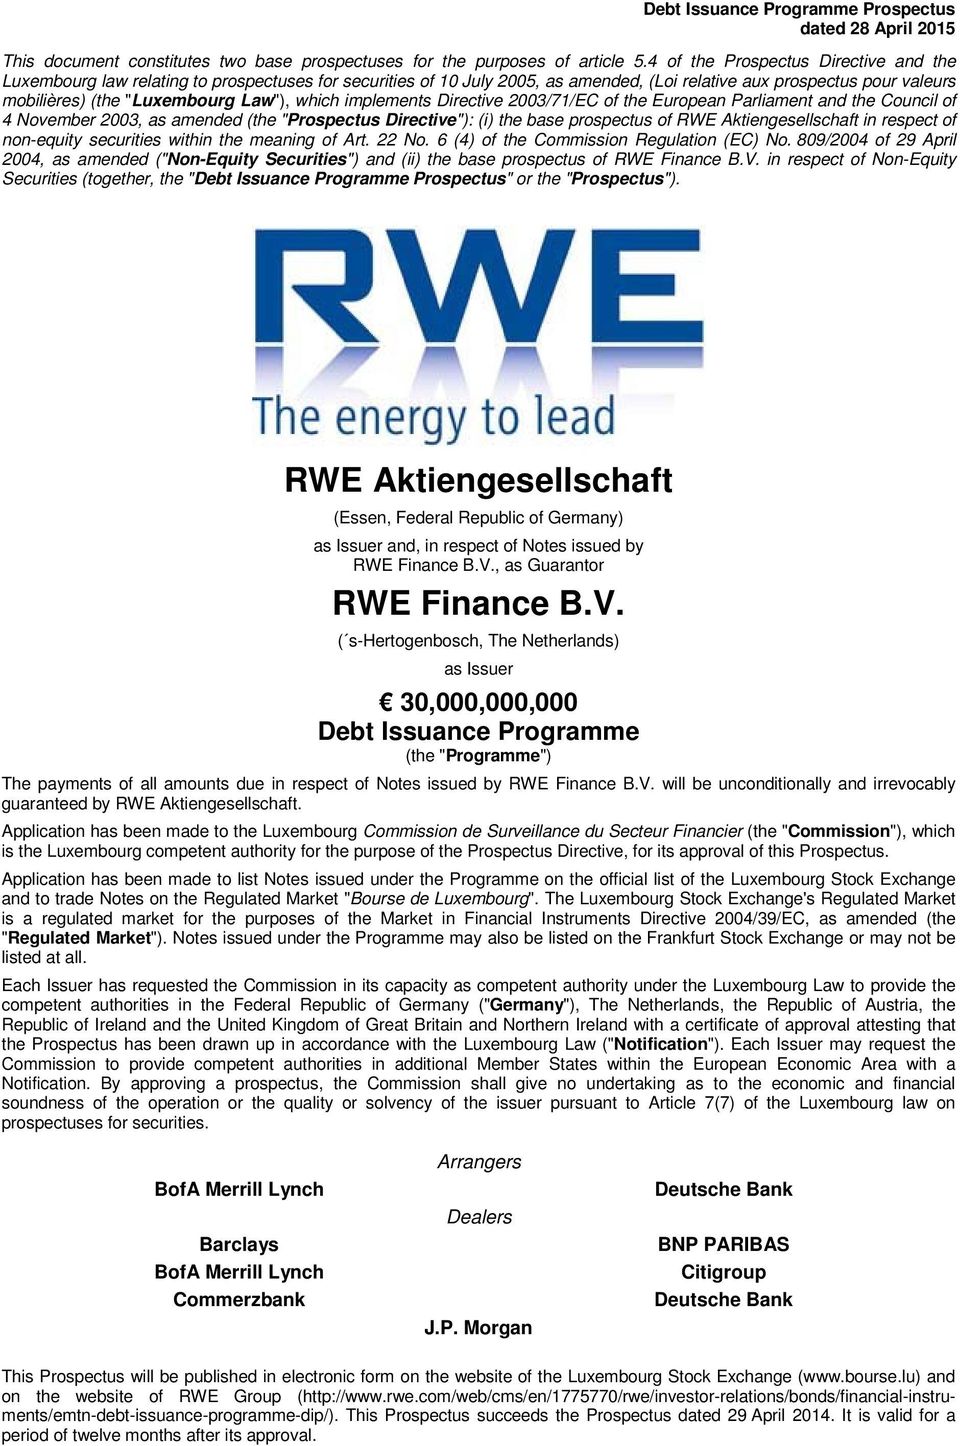 which implements Directive 2003/71/EC of the European Parliament and the Council of 4 November 2003, as amended (the "Prospectus Directive"): (i) the base prospectus of RWE Aktiengesellschaft in